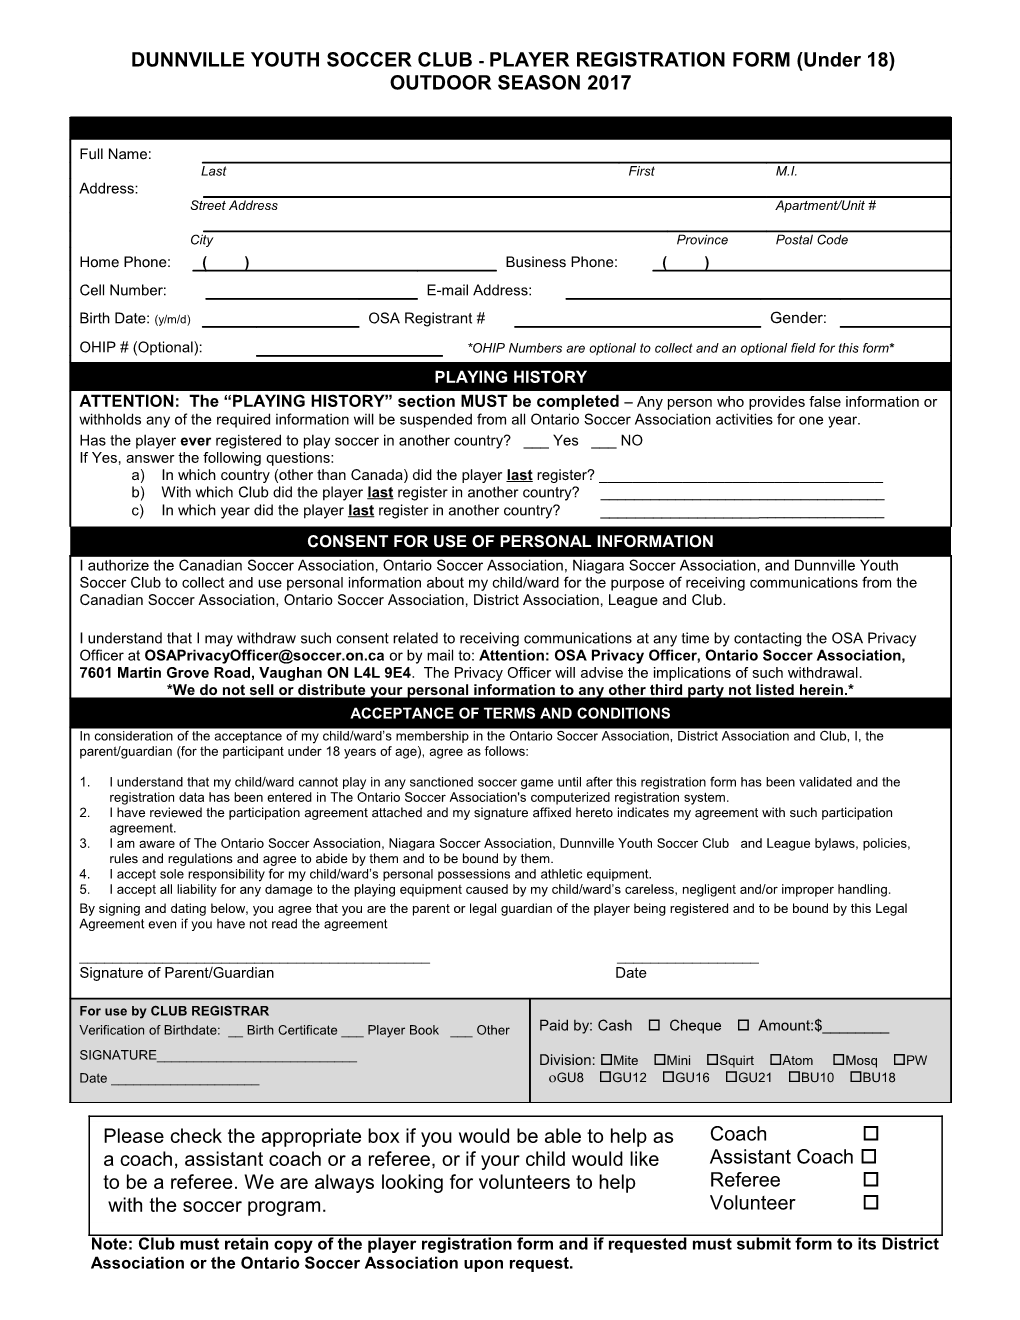 DUNNVILLE YOUTH SOCCER CLUB - PLAYER REGISTRATION FORM (Under 18)